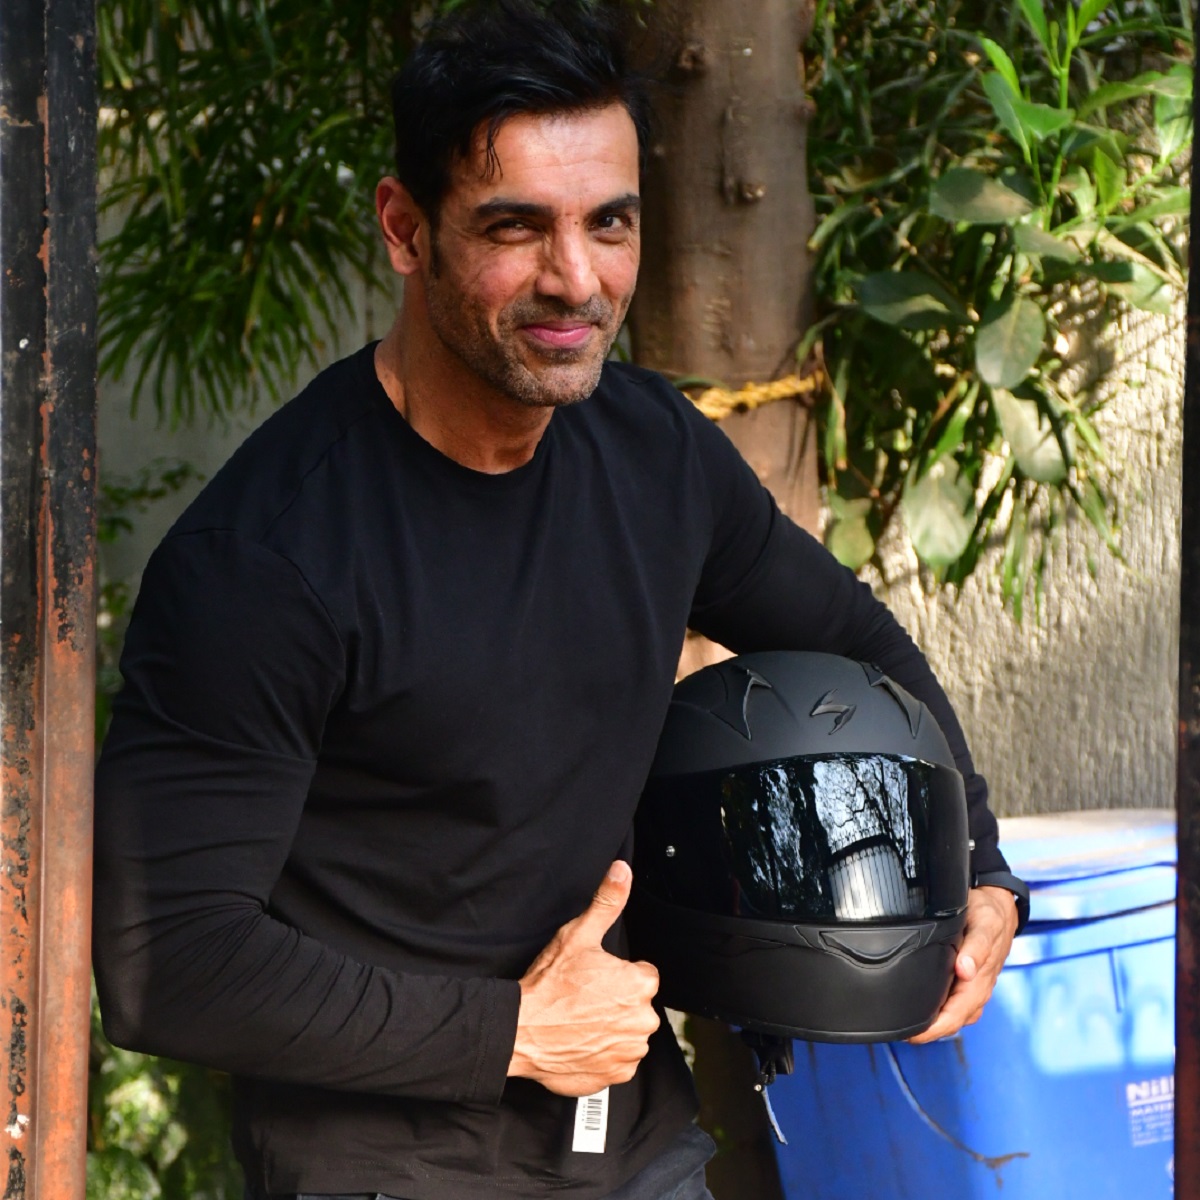 EXCLUSIVE: John Abraham wraps up Satyameva Jayate 2, moves on to Attack in Delhi and then finally SRK's Pathan